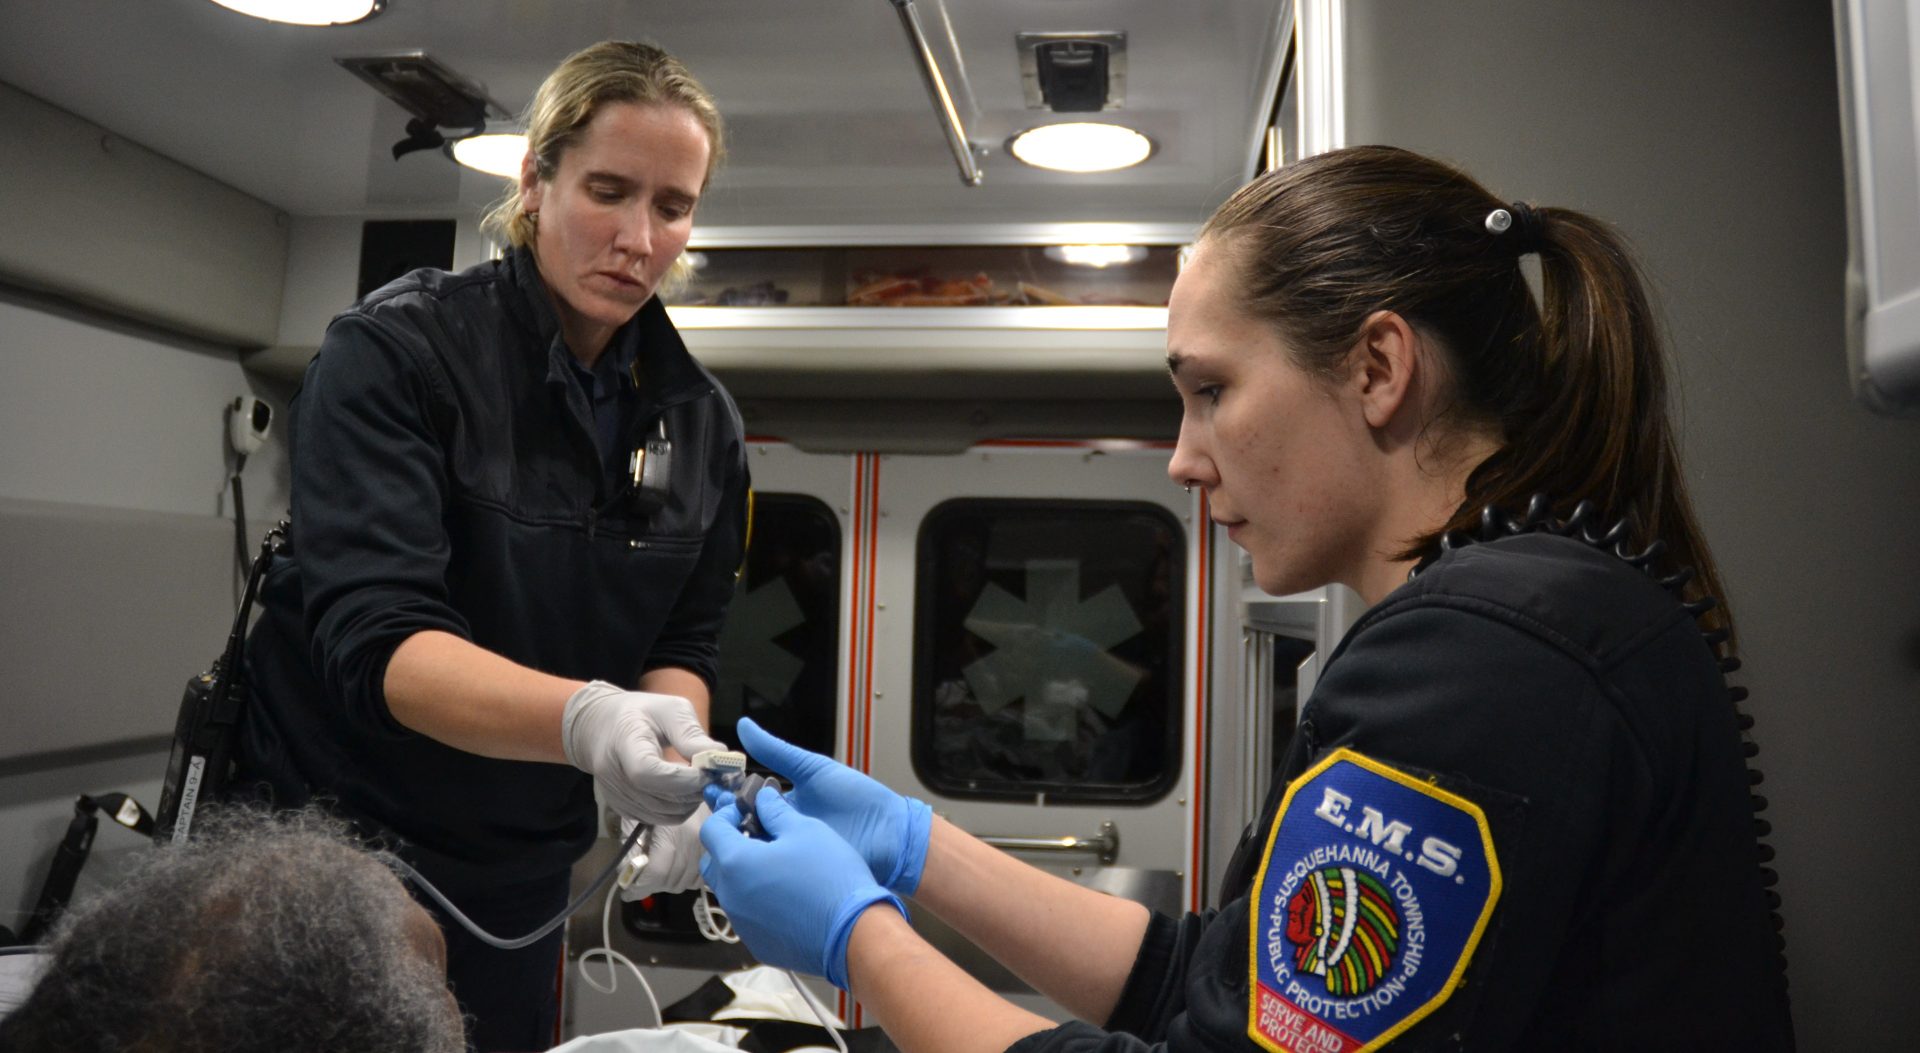 Paramedic Julia Hanson, left, and emergency medical technician Justine Berry, right, check their patient’s vital signs. Emergency services workers are at increased risk for contracting and spreading infectious diseases.